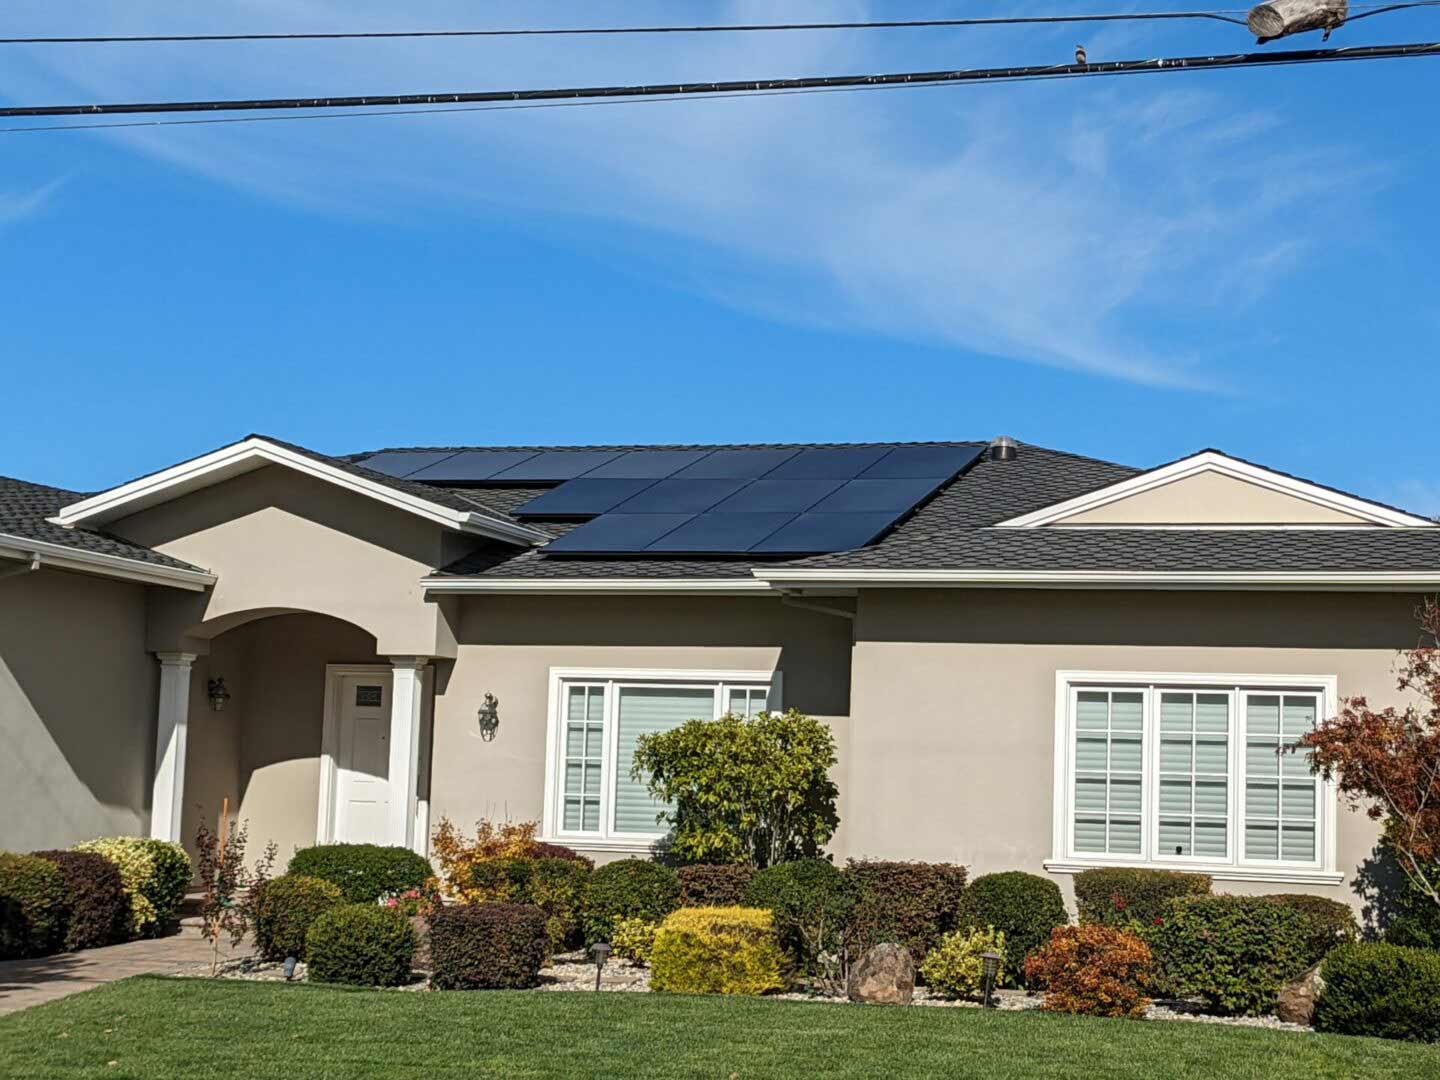 Adding solar and backup battery storage to your existing solar system